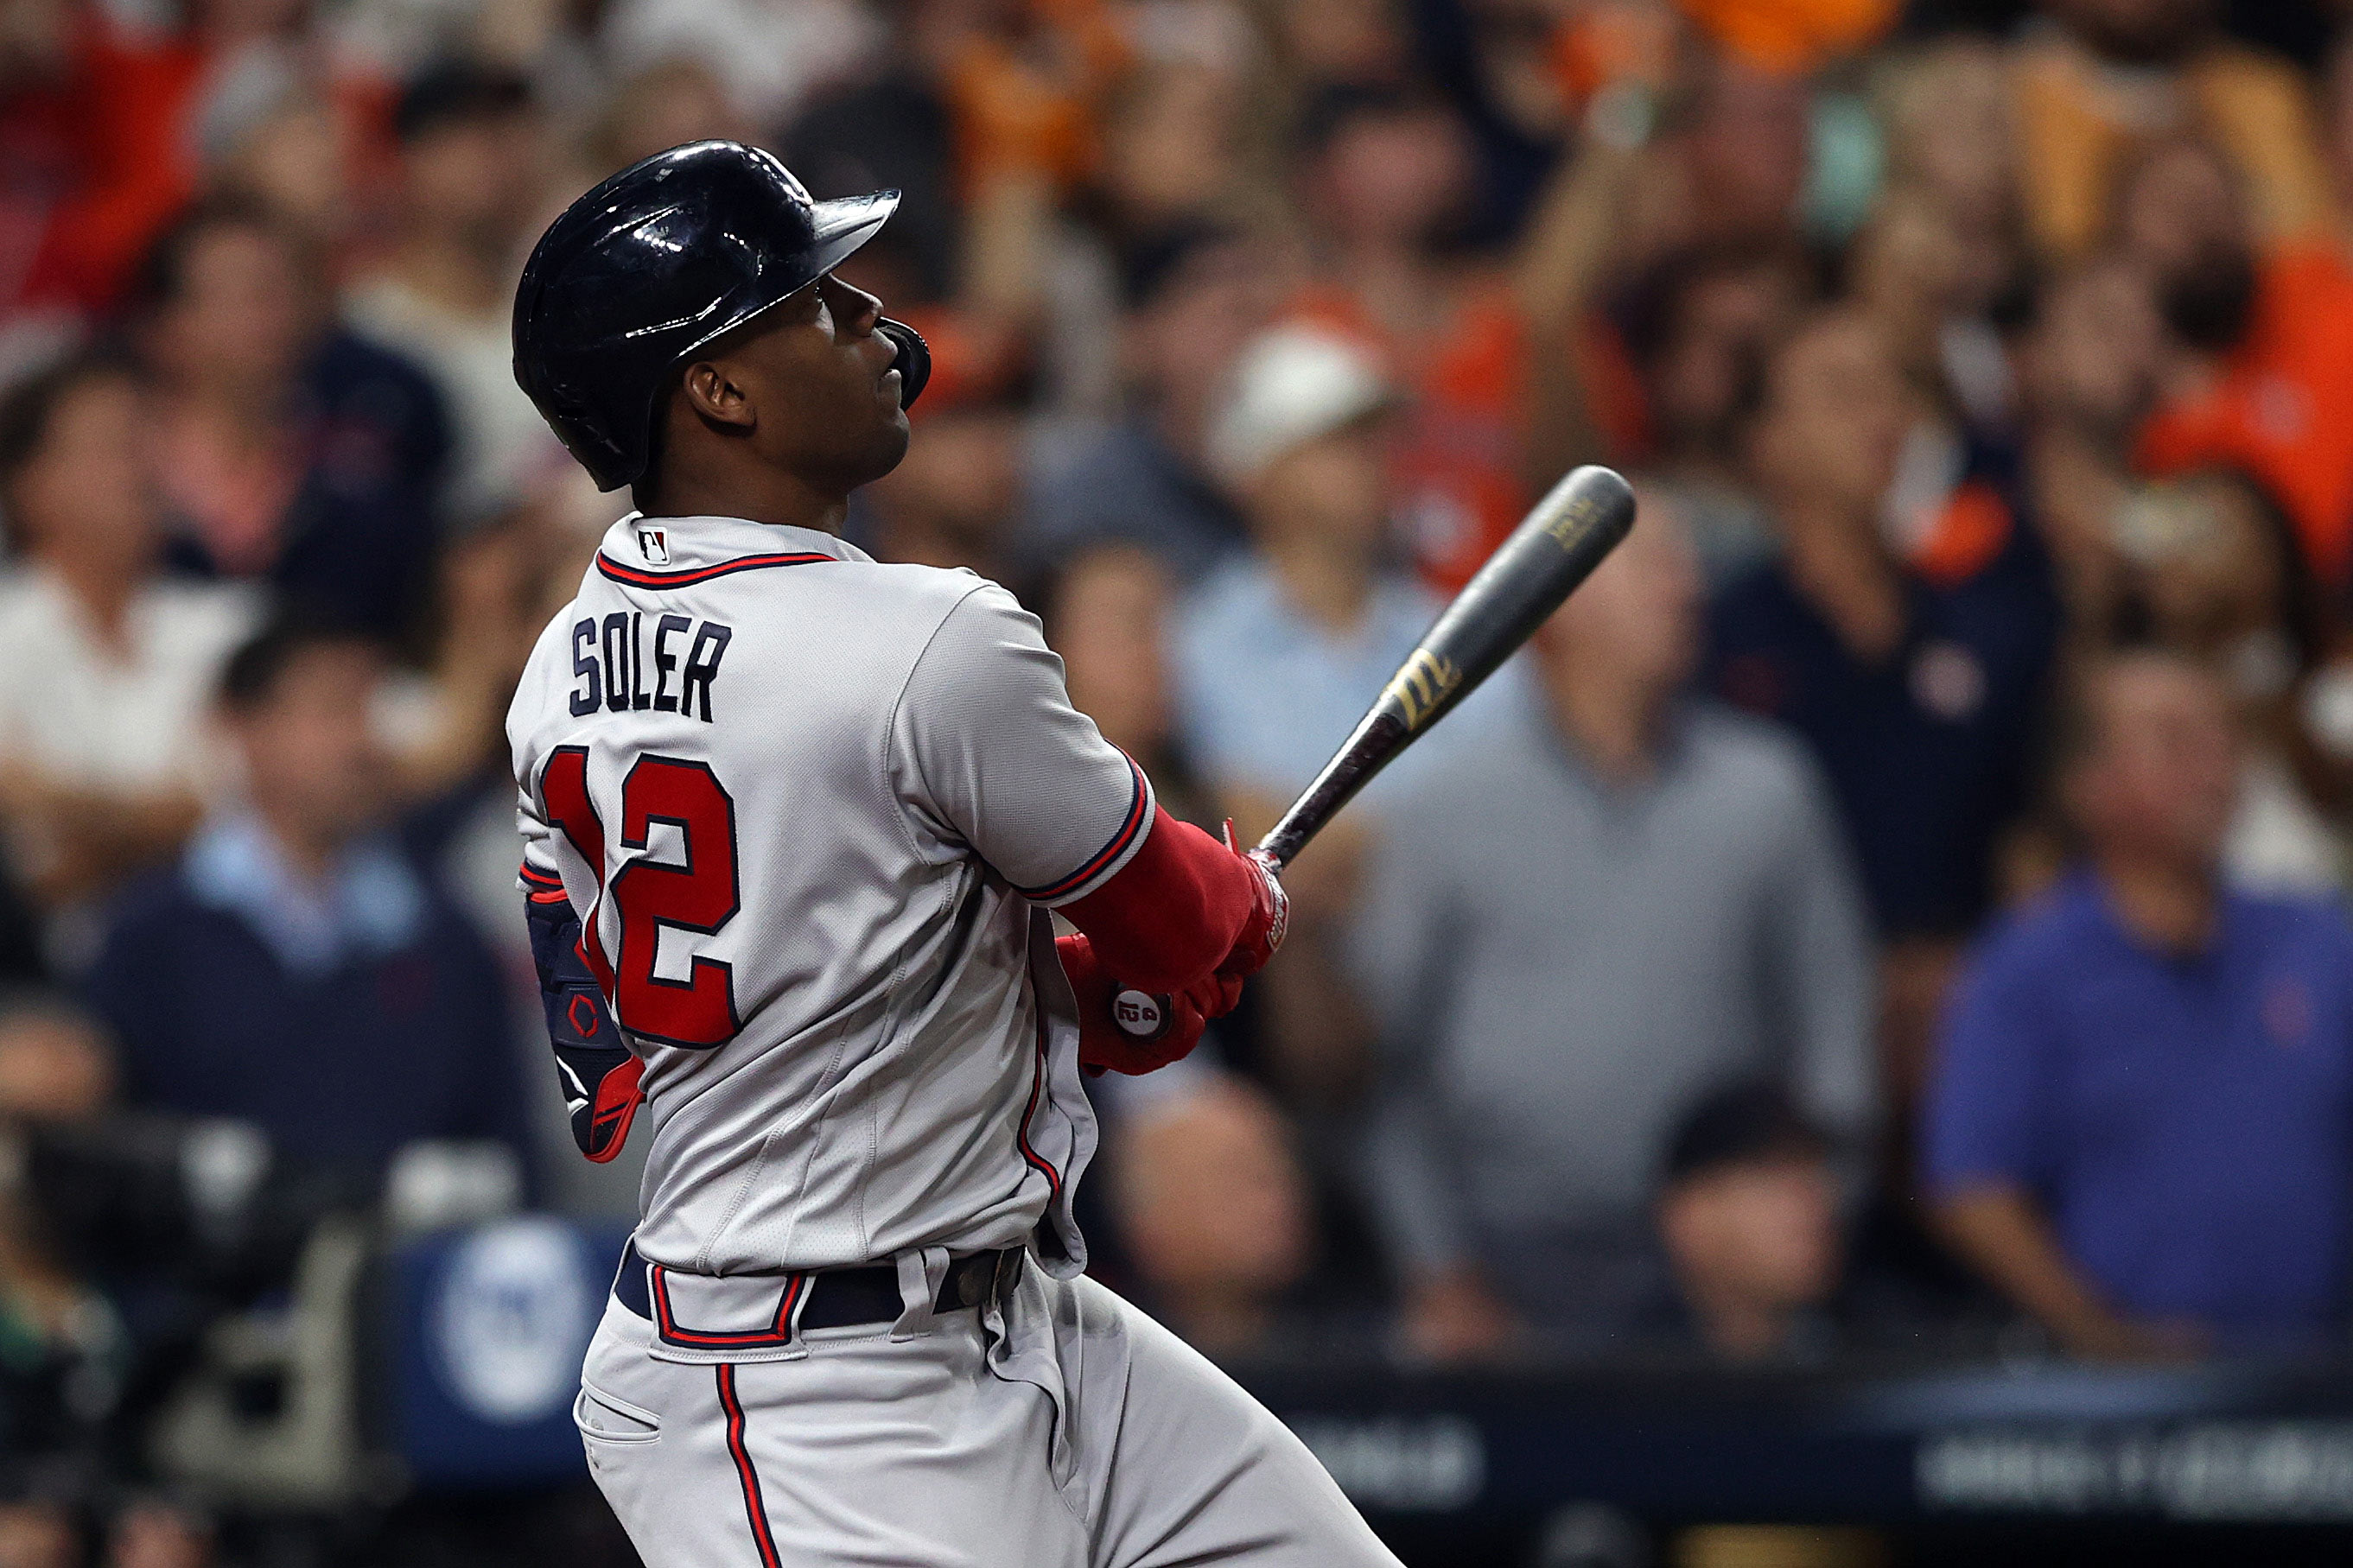 Jorge Soler of the Braves hits a three run home run during the third inning in Game 6.